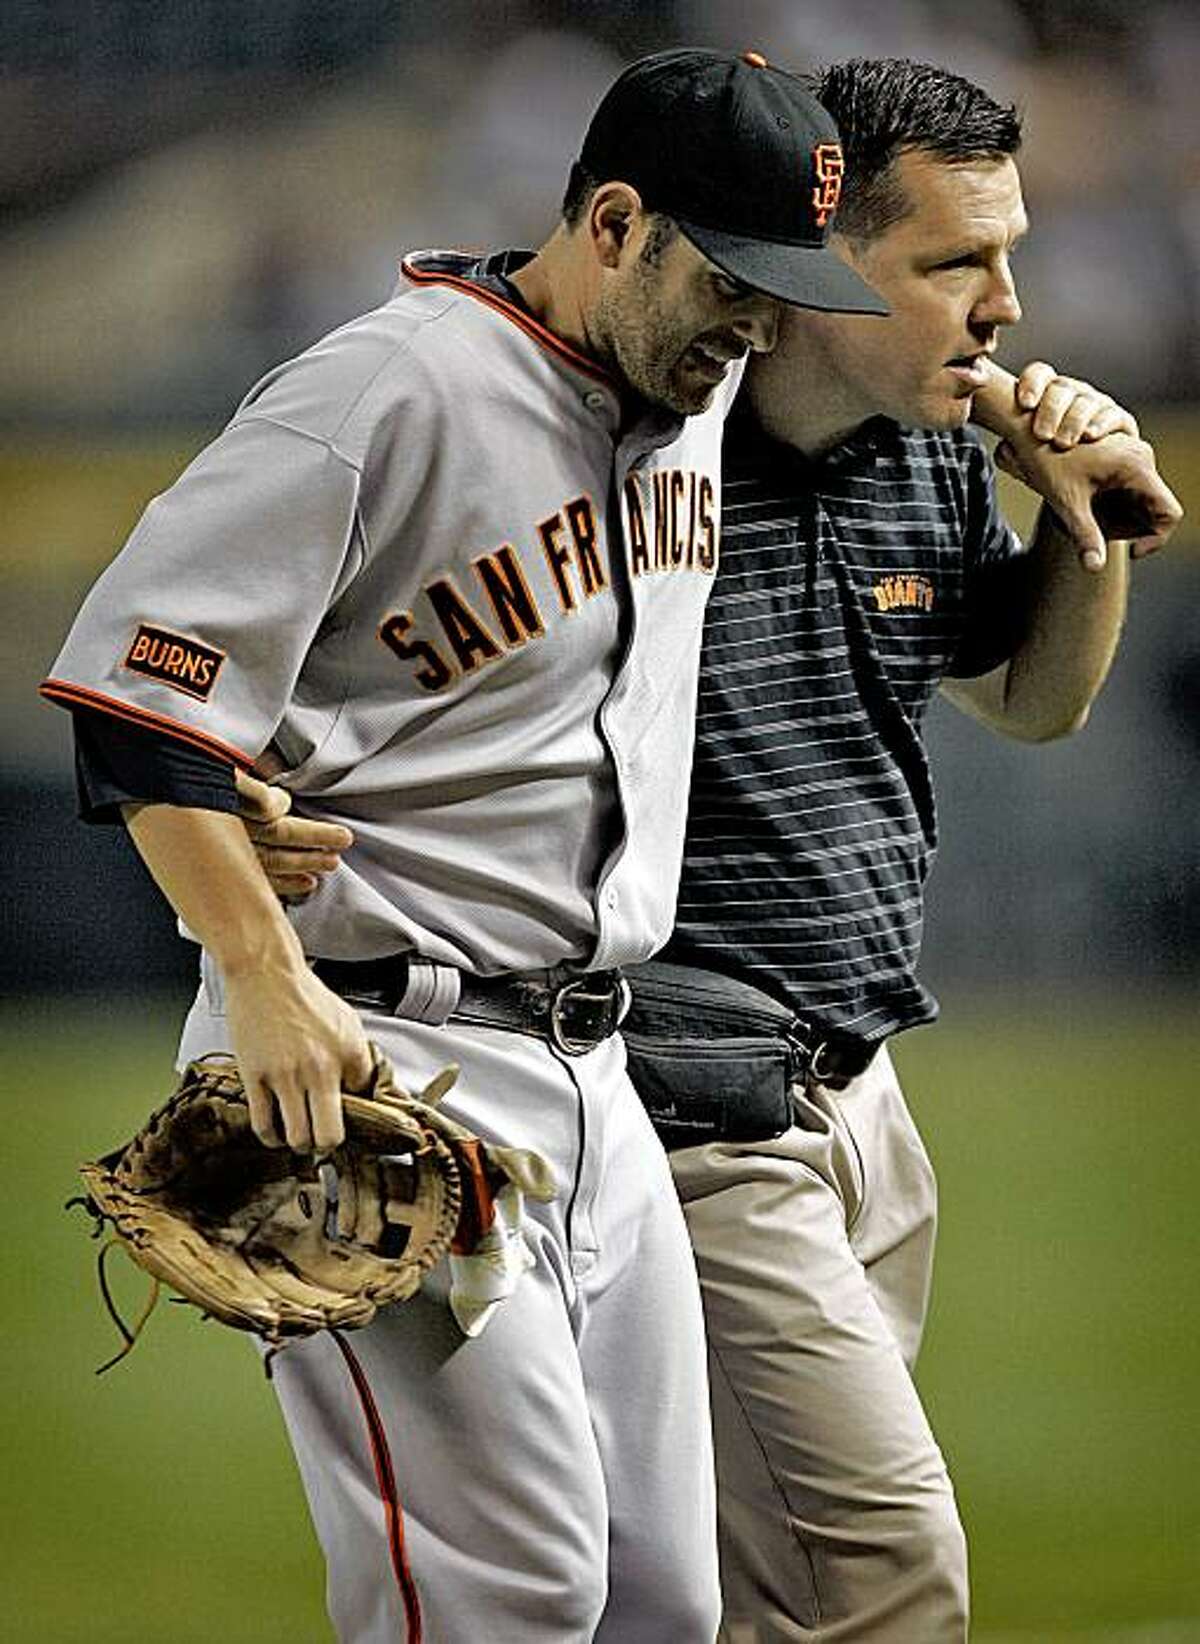 San Francisco Giants' Freddie Sanchez is helped off the field during the first inning of a baseball game against the Arizona Diamondbacks, Monday, Sept. 21, 2009, in Phoenix.